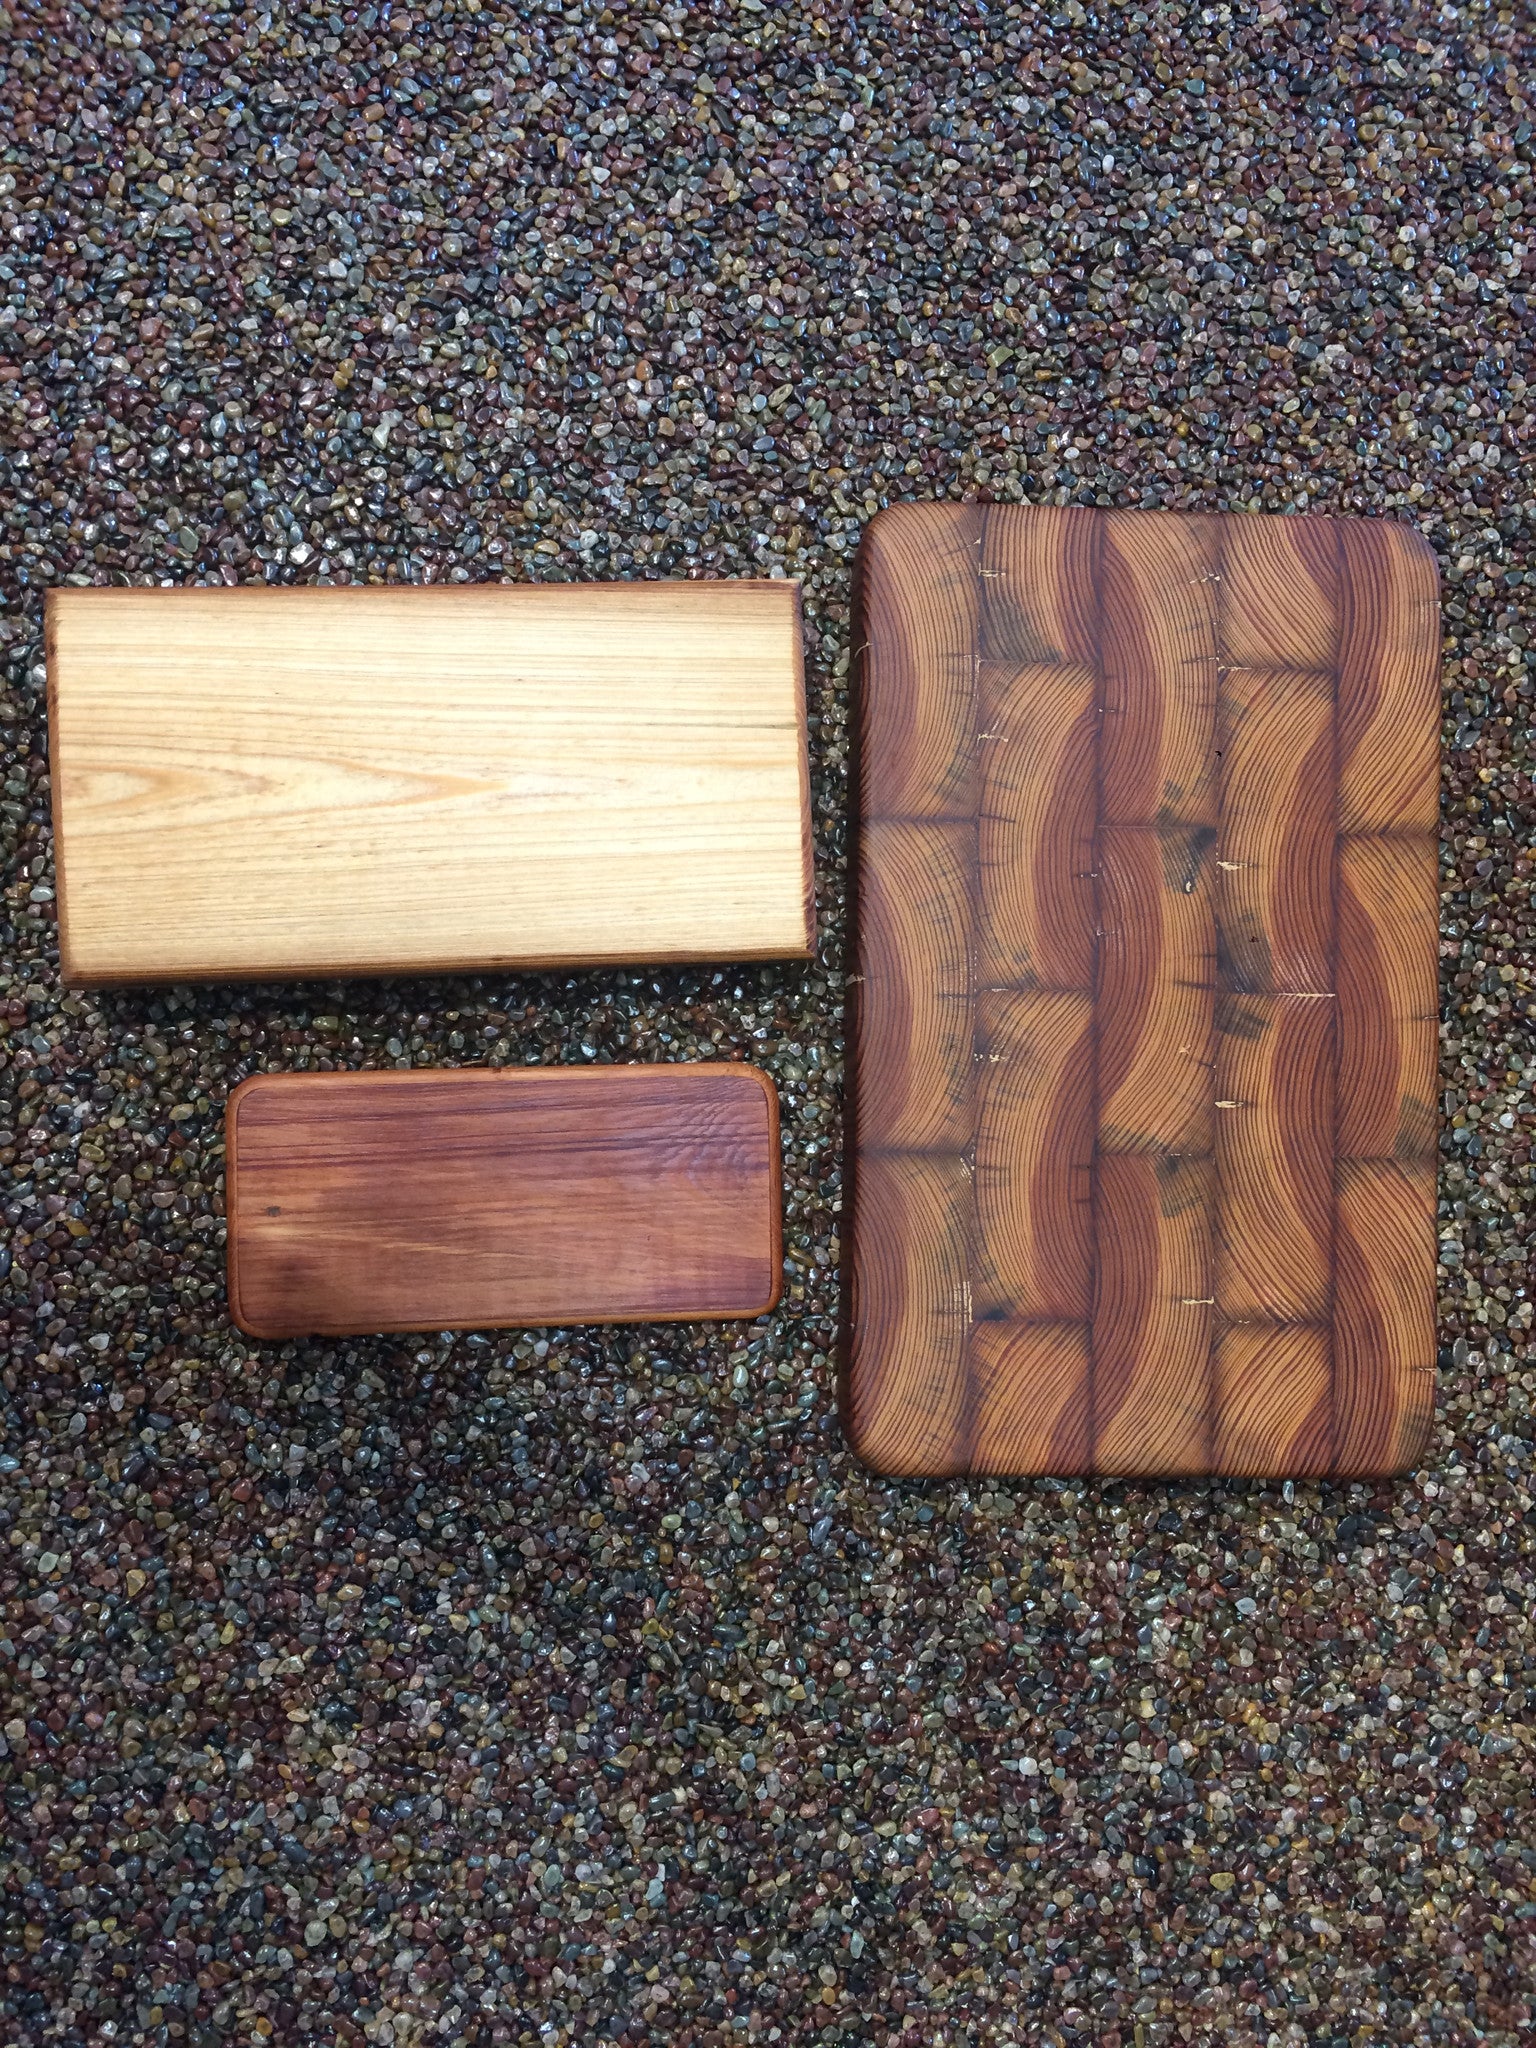 Reclaimed Wood Cutting Board and Cheese Board - Rivers & Glen Trading Co.